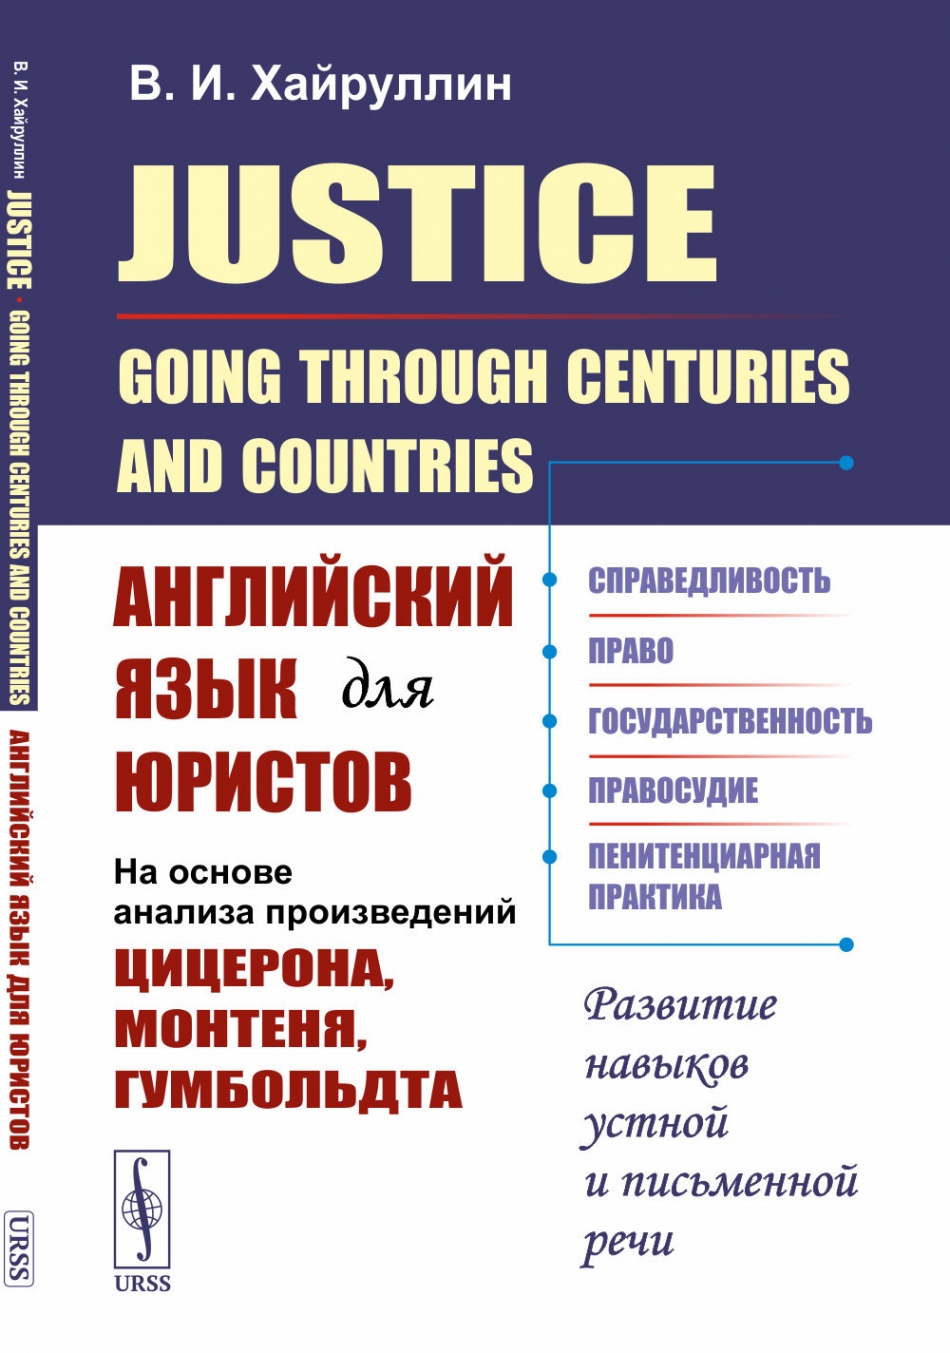  .. Justice: Going Through Centuries and Countries:     (    , , ).  